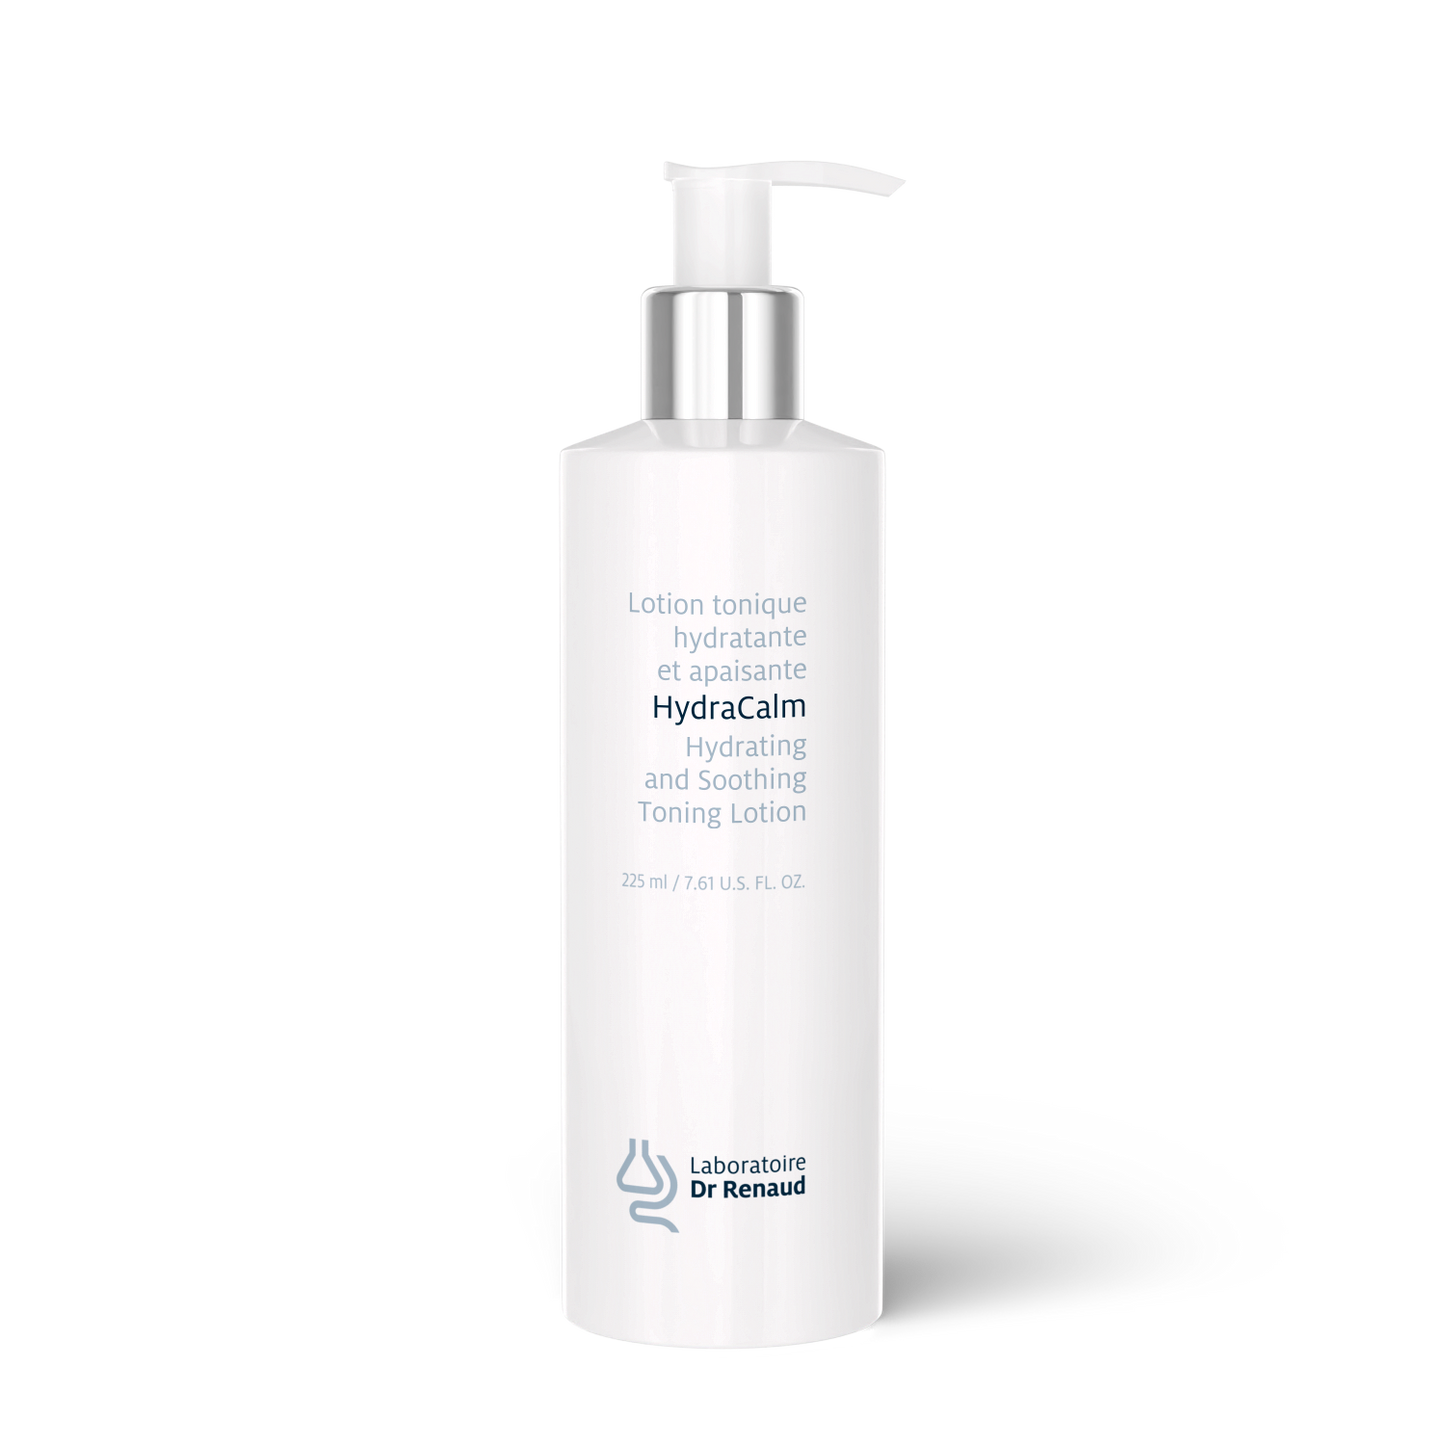 Laboratoire Dr Renaud – HydraCalm – Hydrating and Soothing Toning Lotion